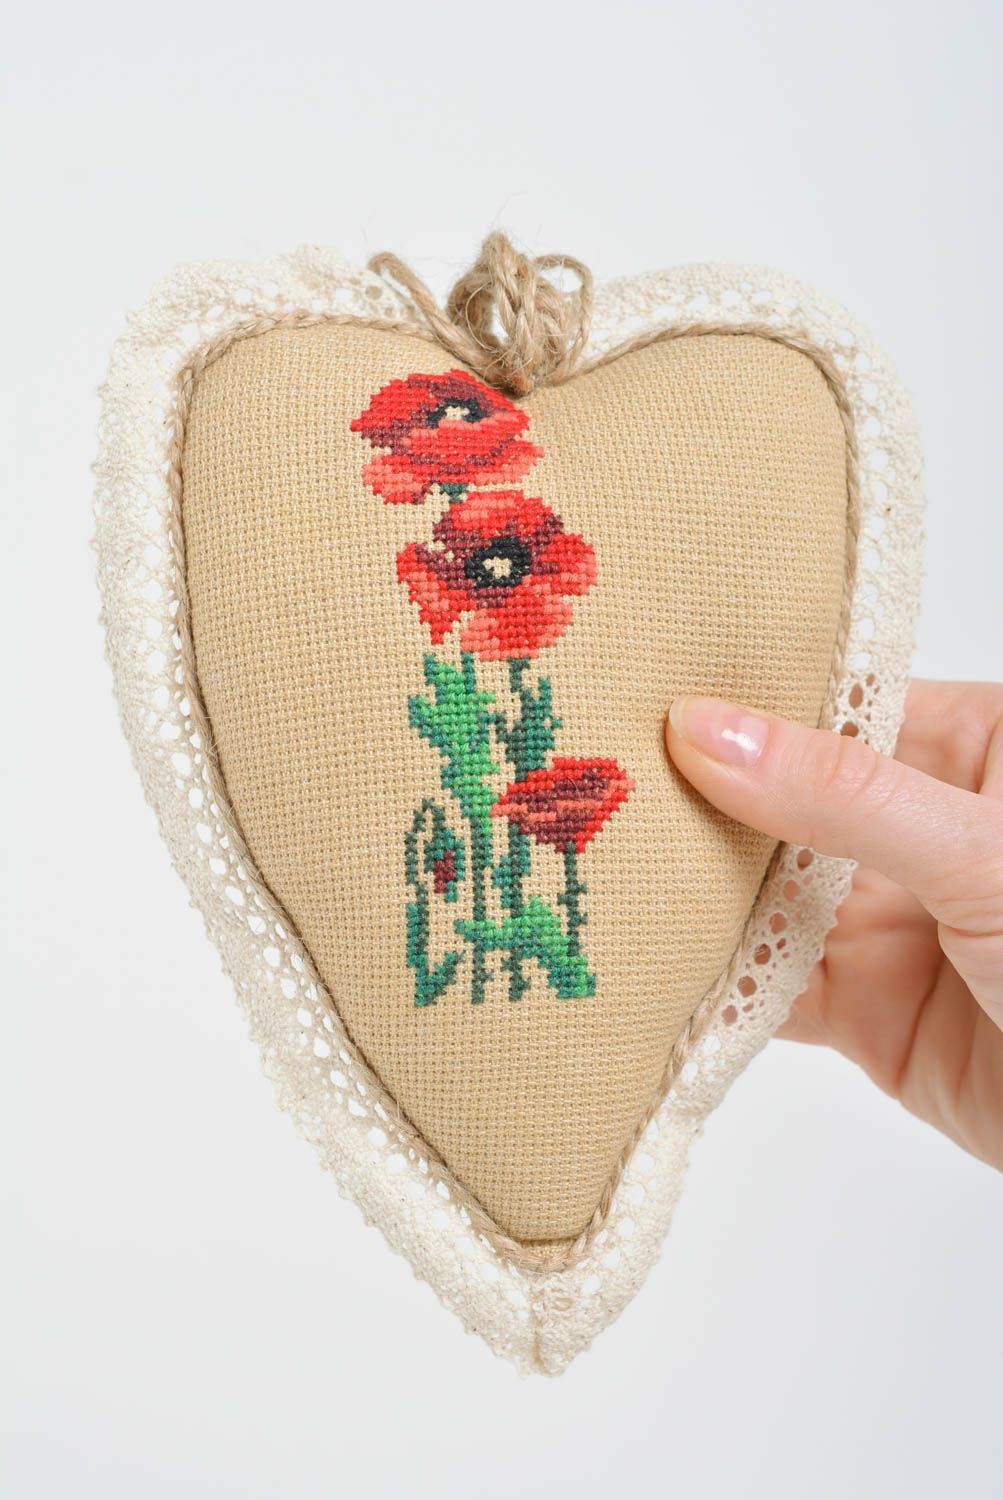 Handmade interior decorative heart-shaped wall hanging with embroidered poppies photo 5